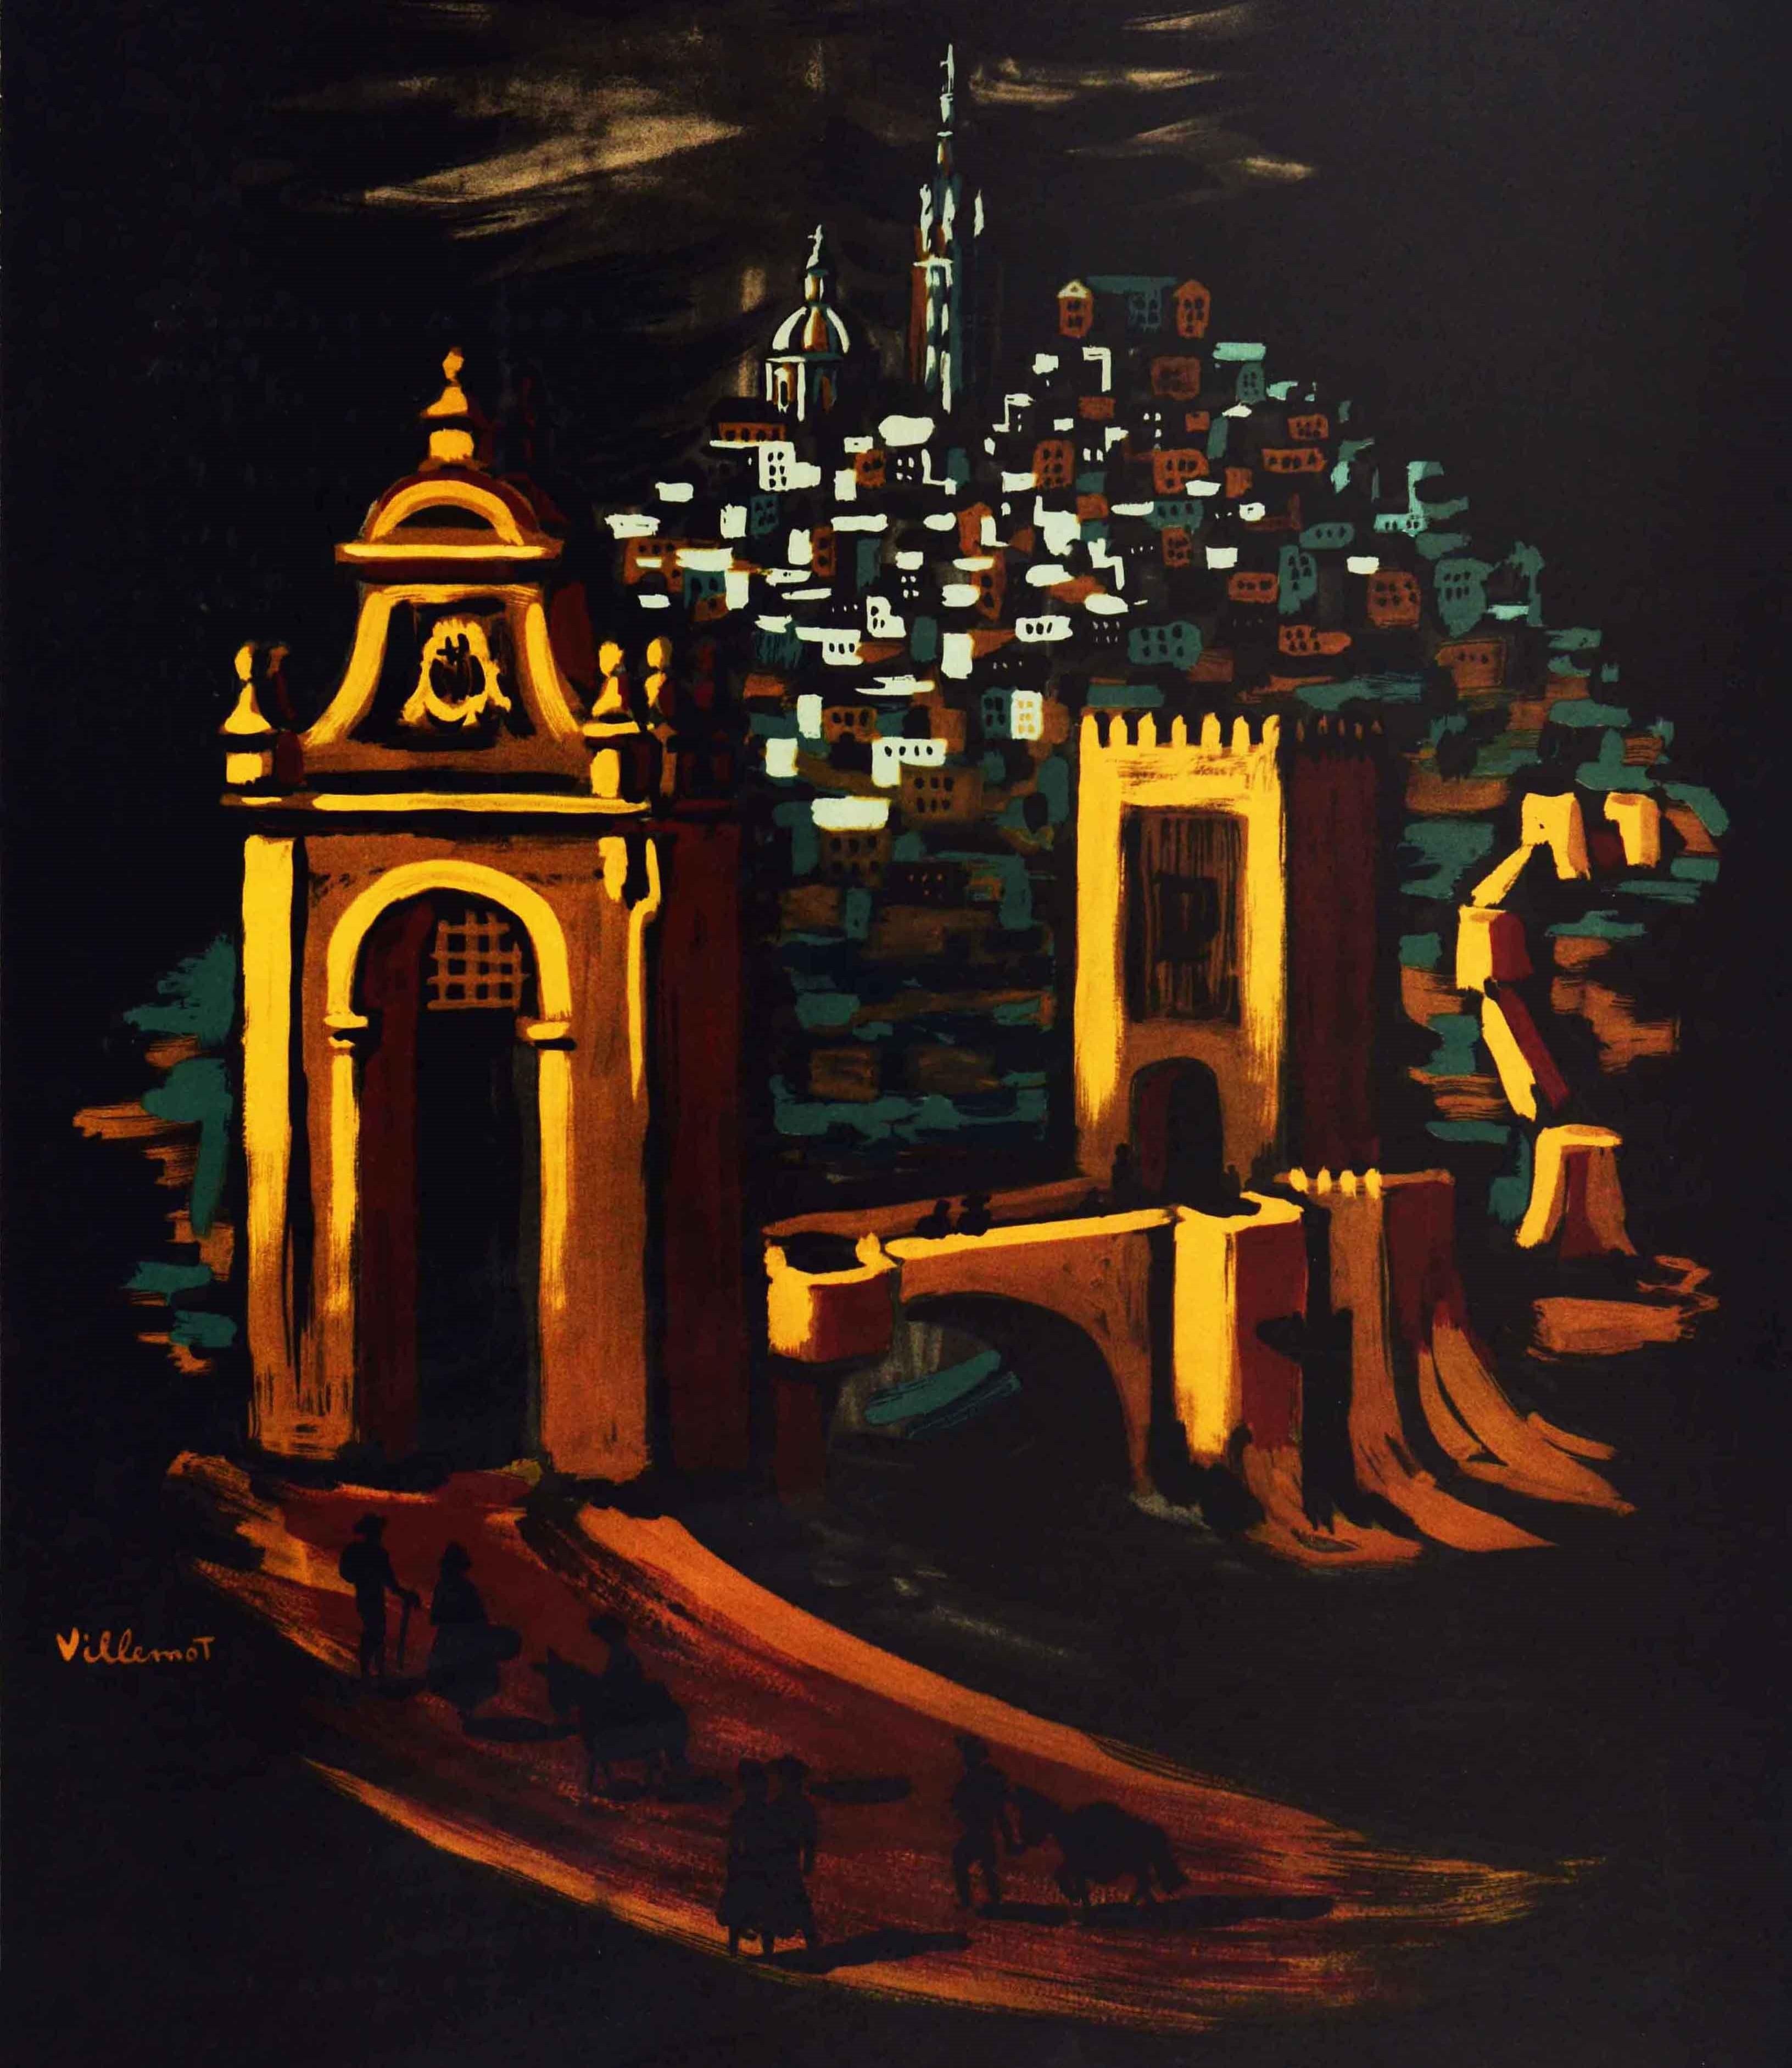 Mid-20th Century Original Vintage Travel Poster For Spain Ft. Walled City Gate Night View Artwork